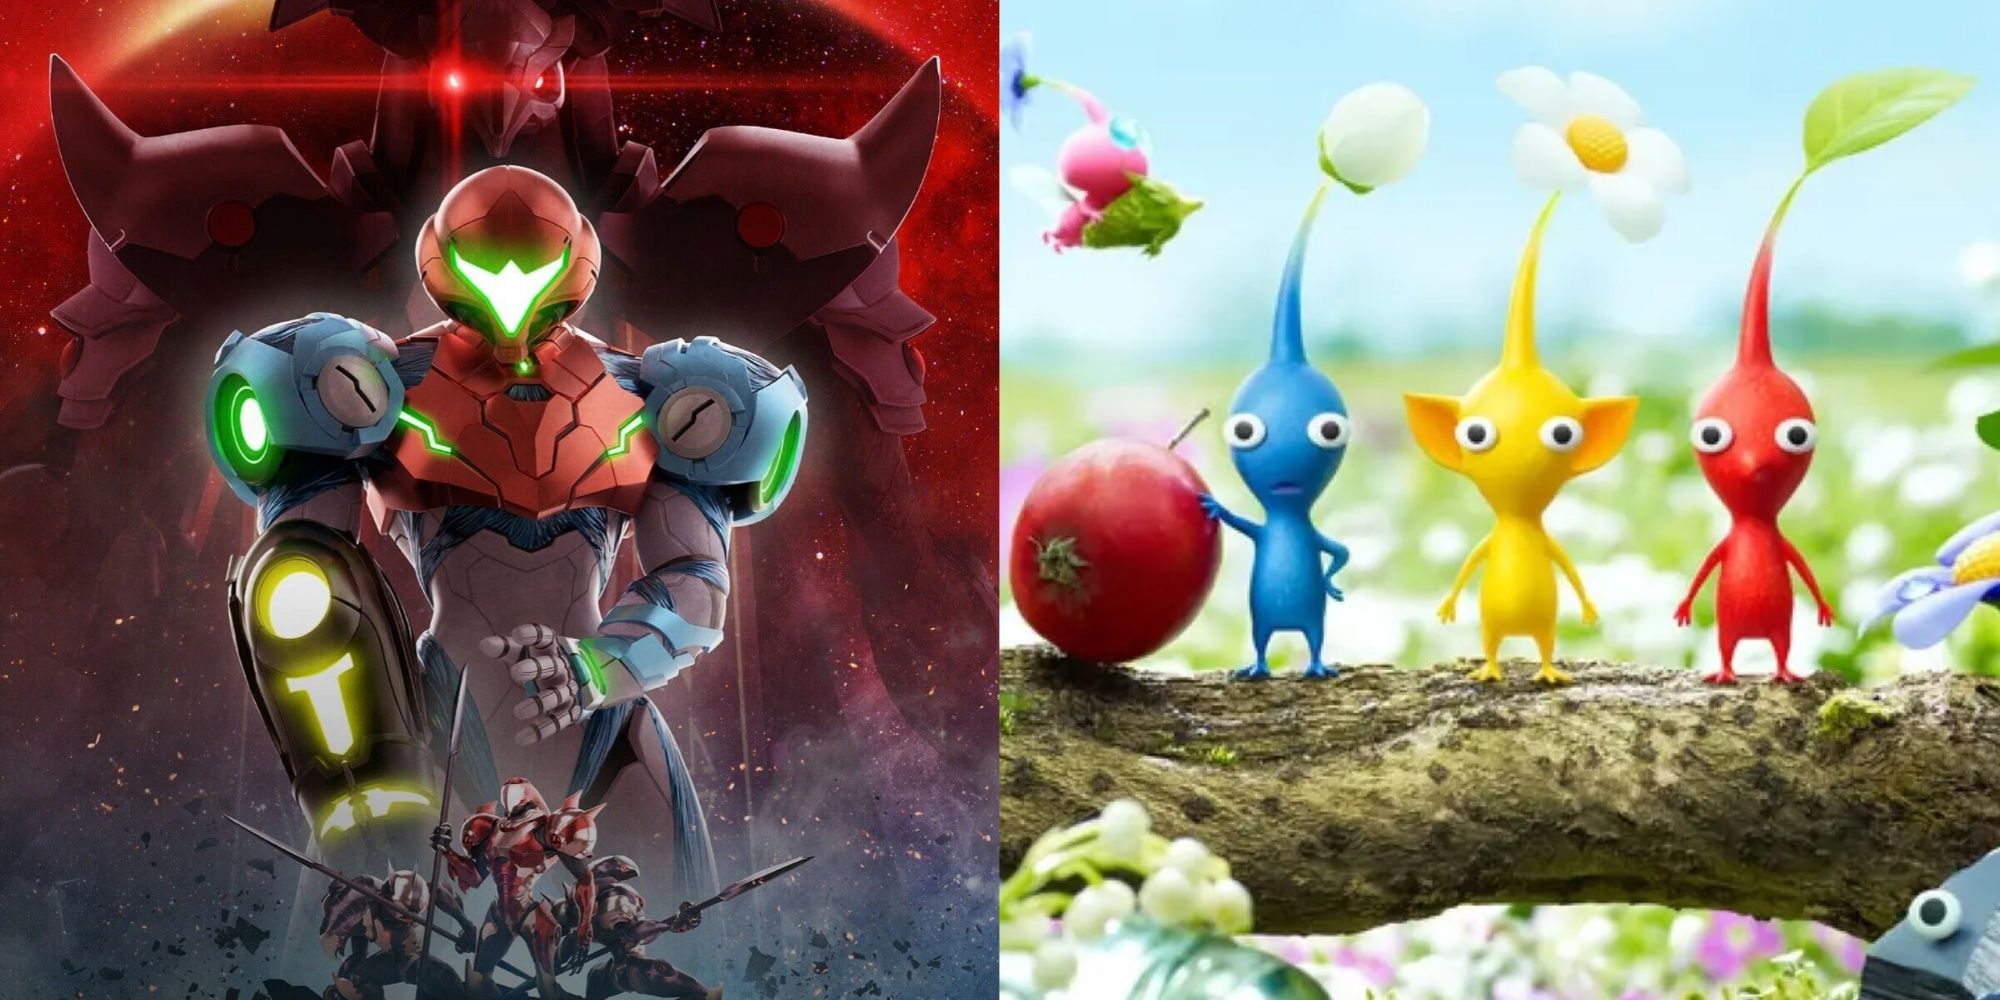 samus in metroid dread, and blue yellow and red pikmin on a branch